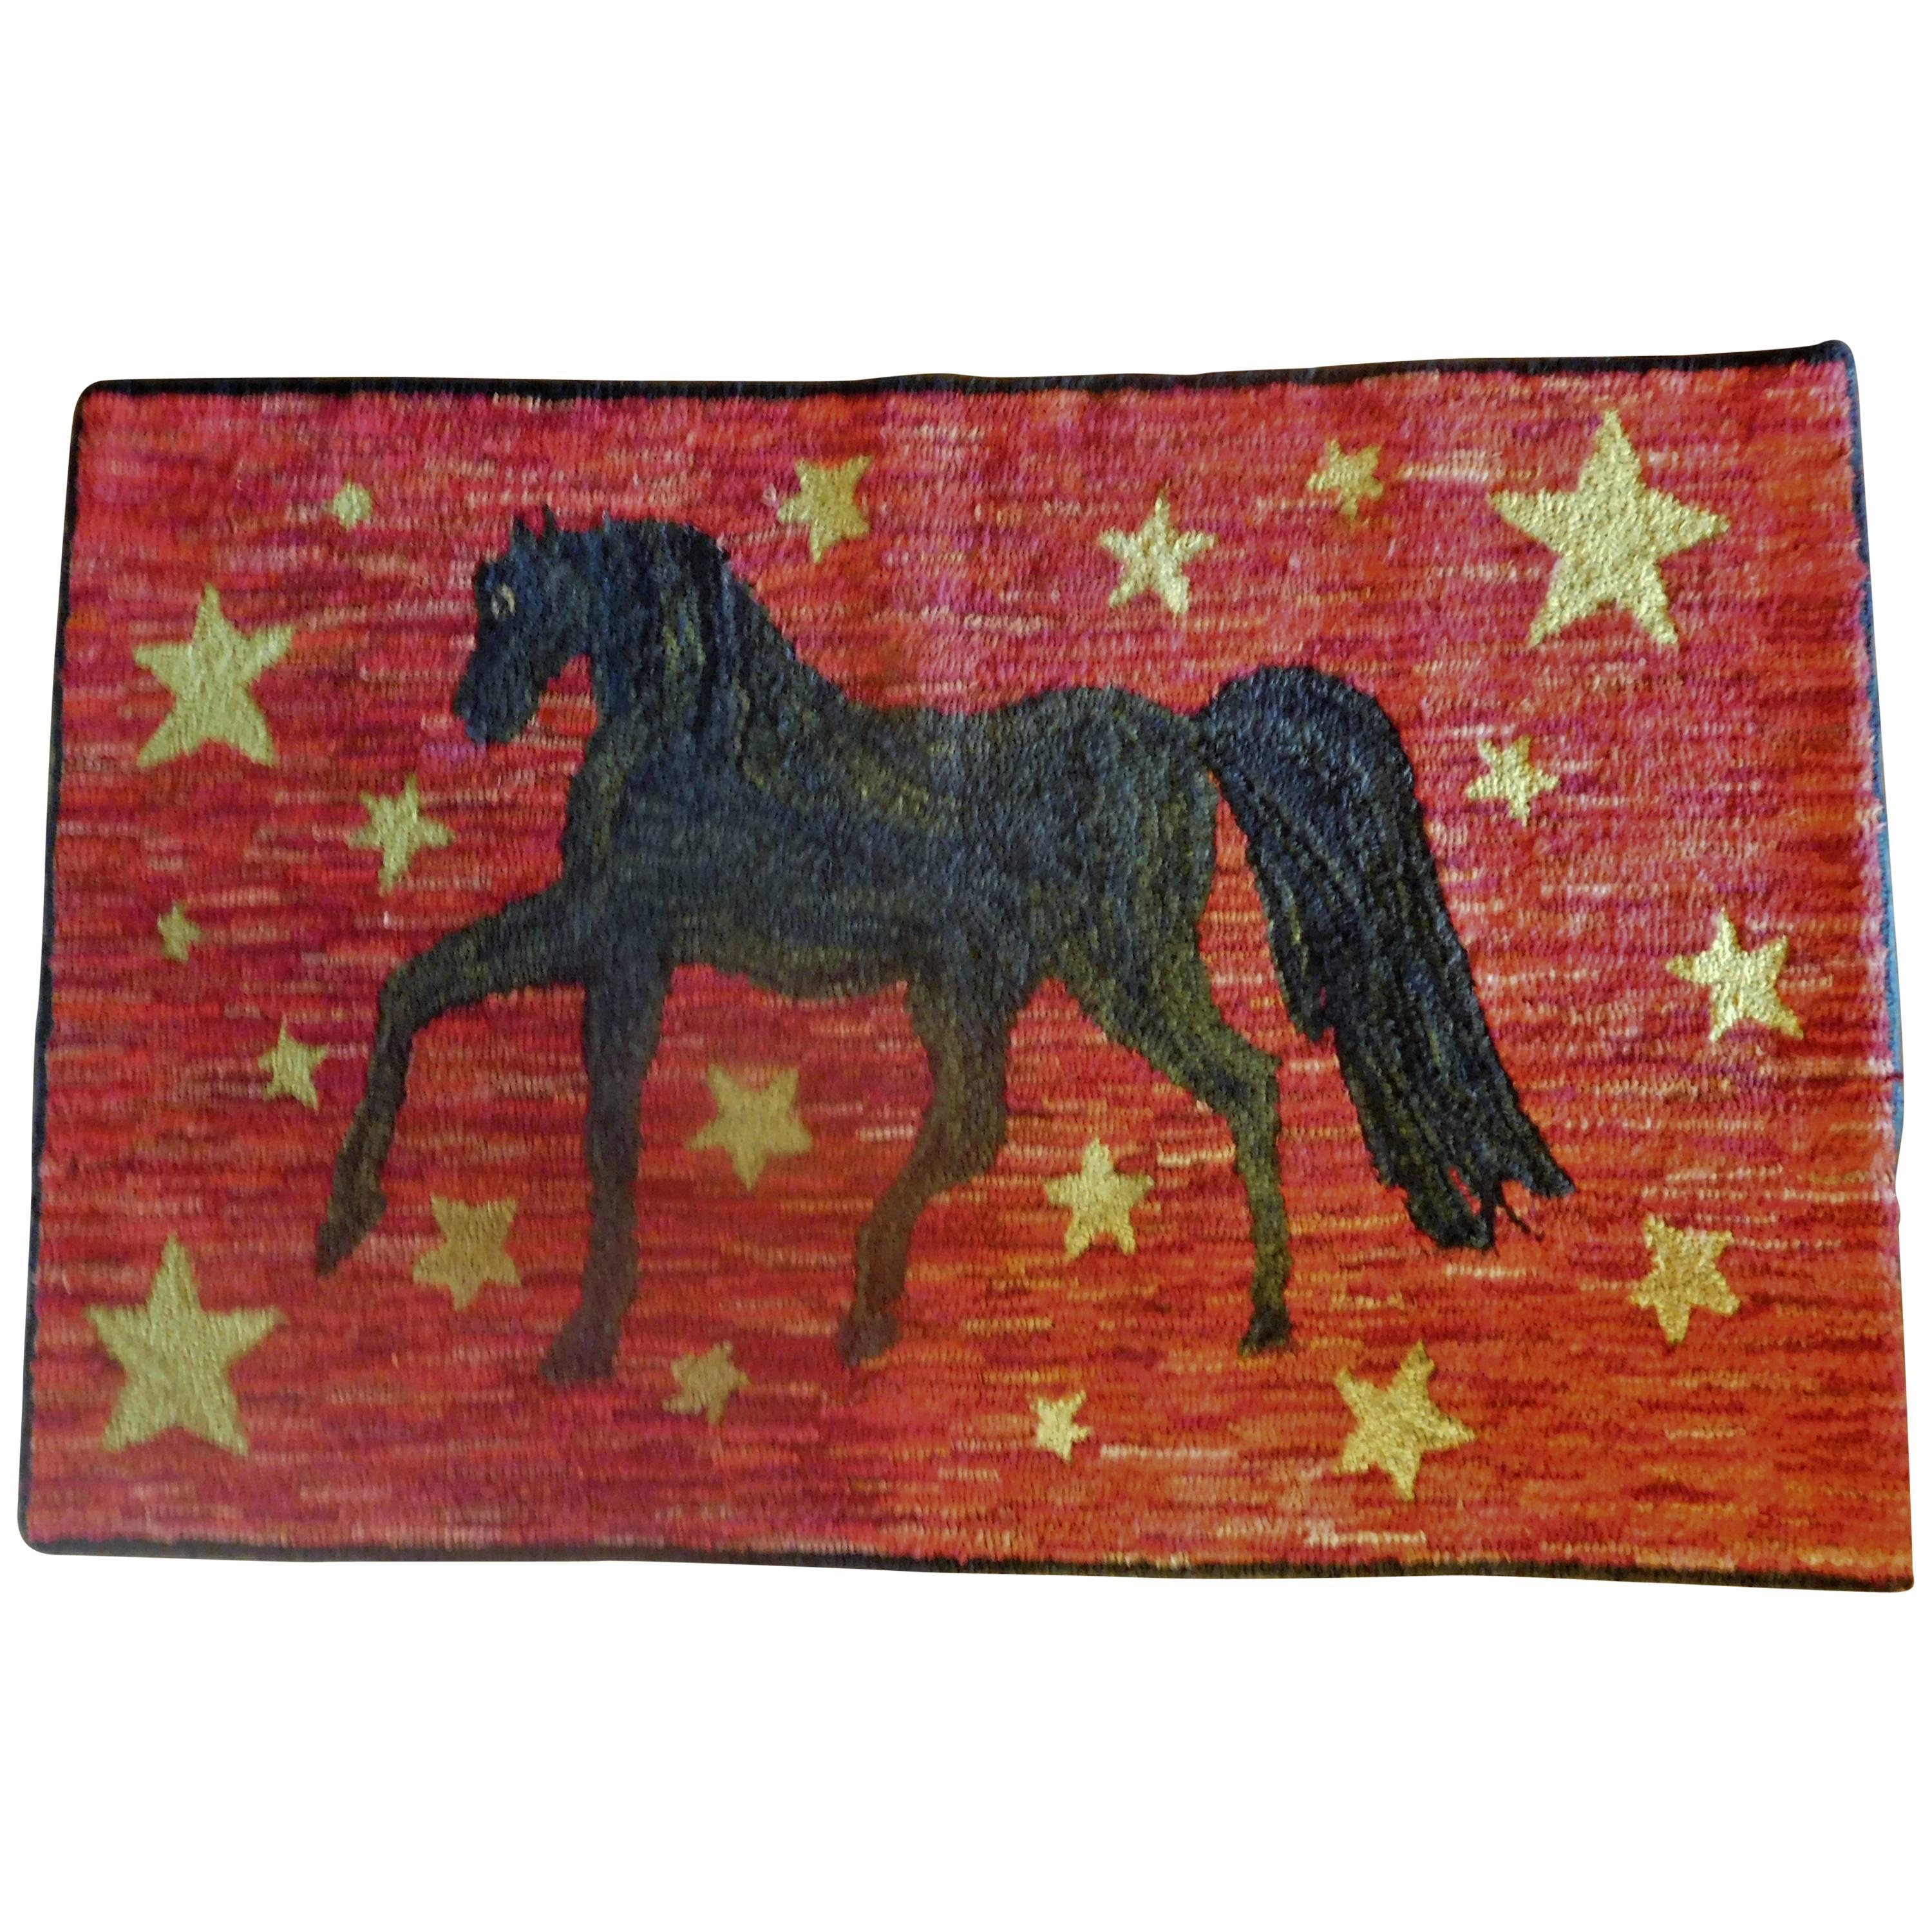 Prancing Morgan Horse on a Hooked Hearth Rug, American Folk Art, 19th Century For Sale